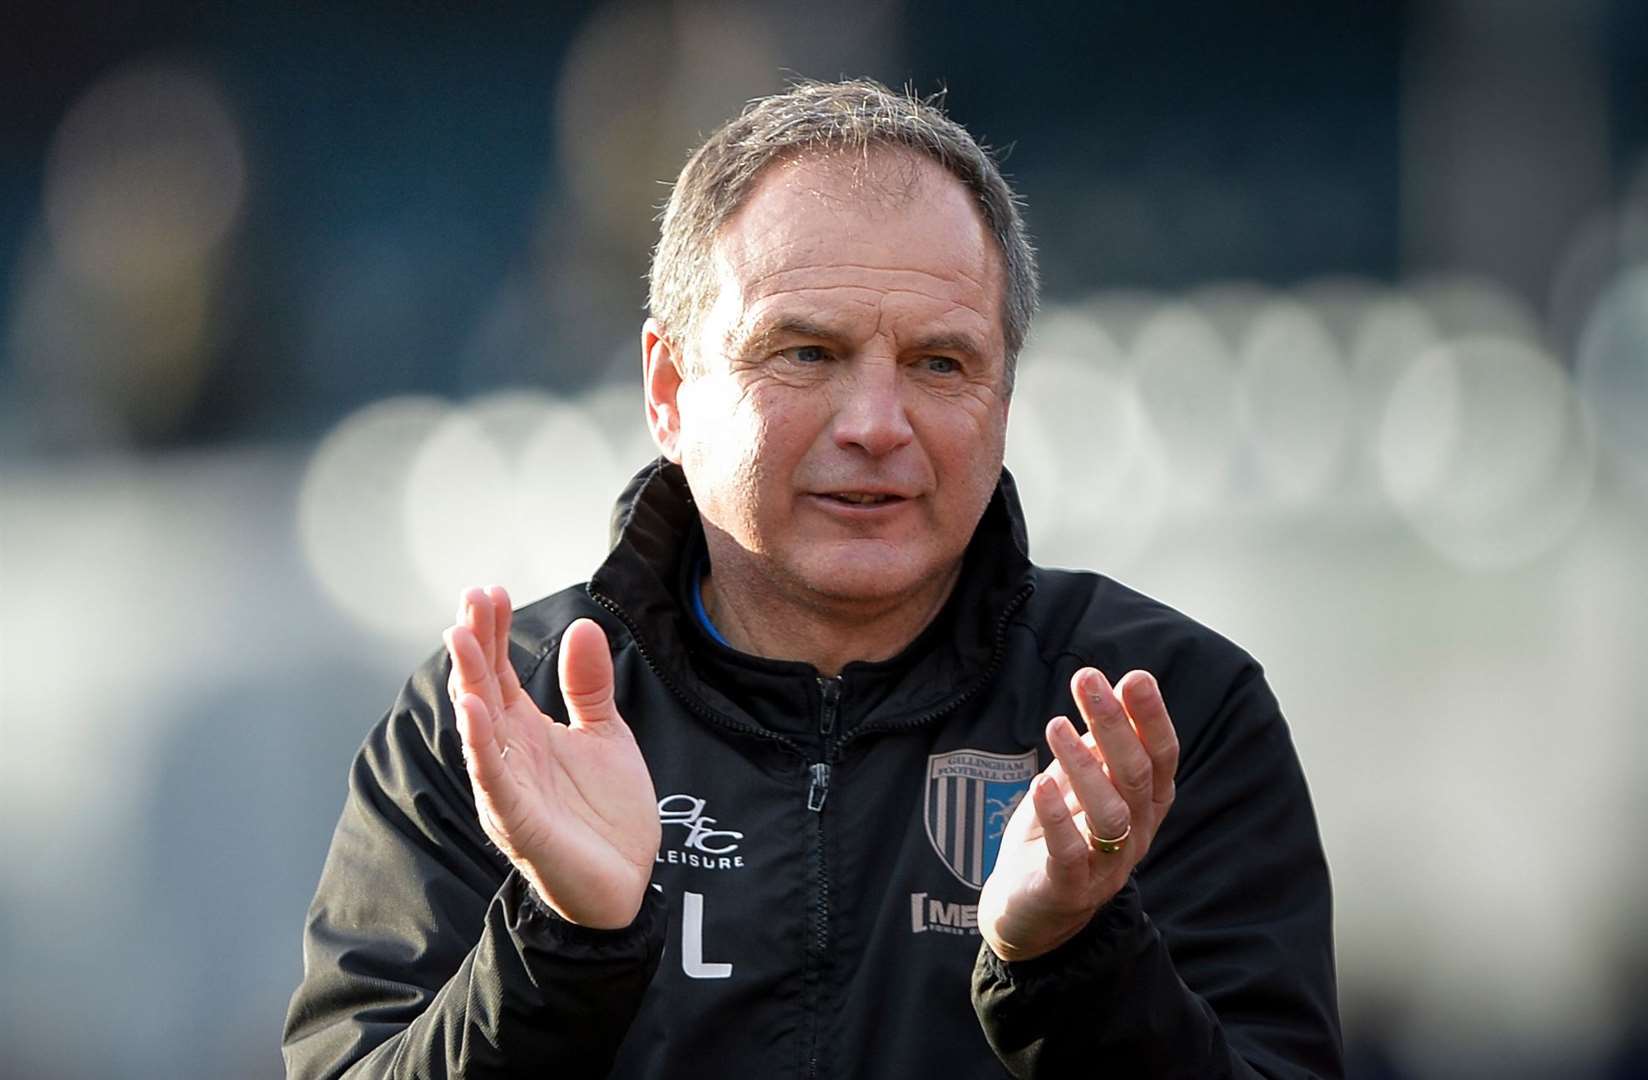 Gillingham's Manager Steve Lovell after a 3-1 victory against Portsmouth, 10th March 2018.. (9248051)